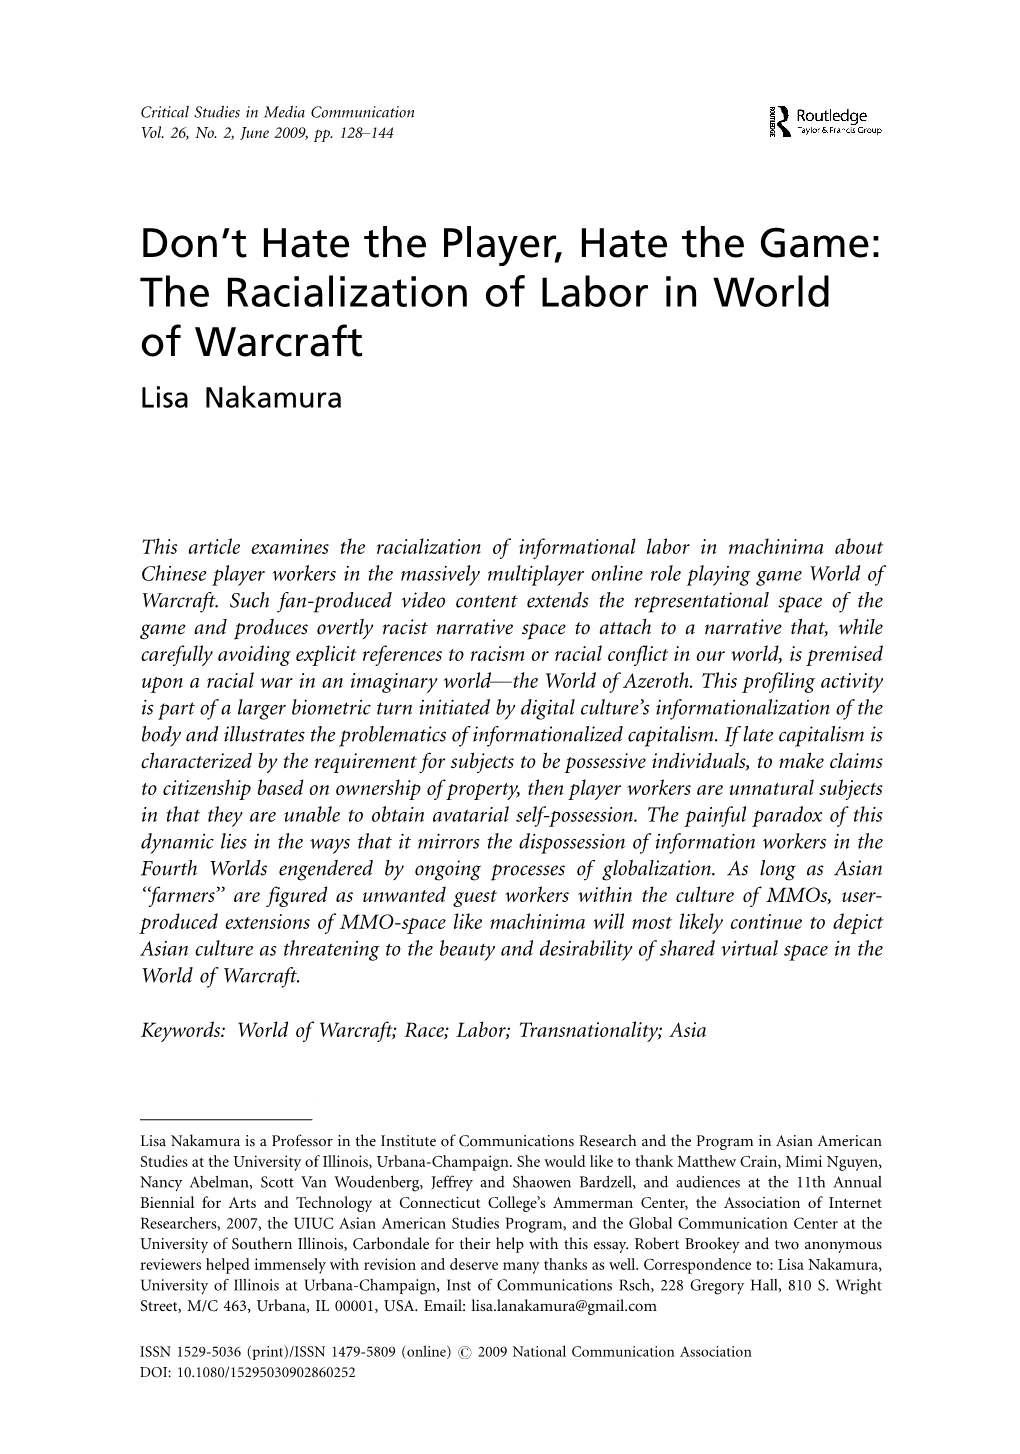 Don't Hate the Player, Hate the Game: the Racialization of Labor in World